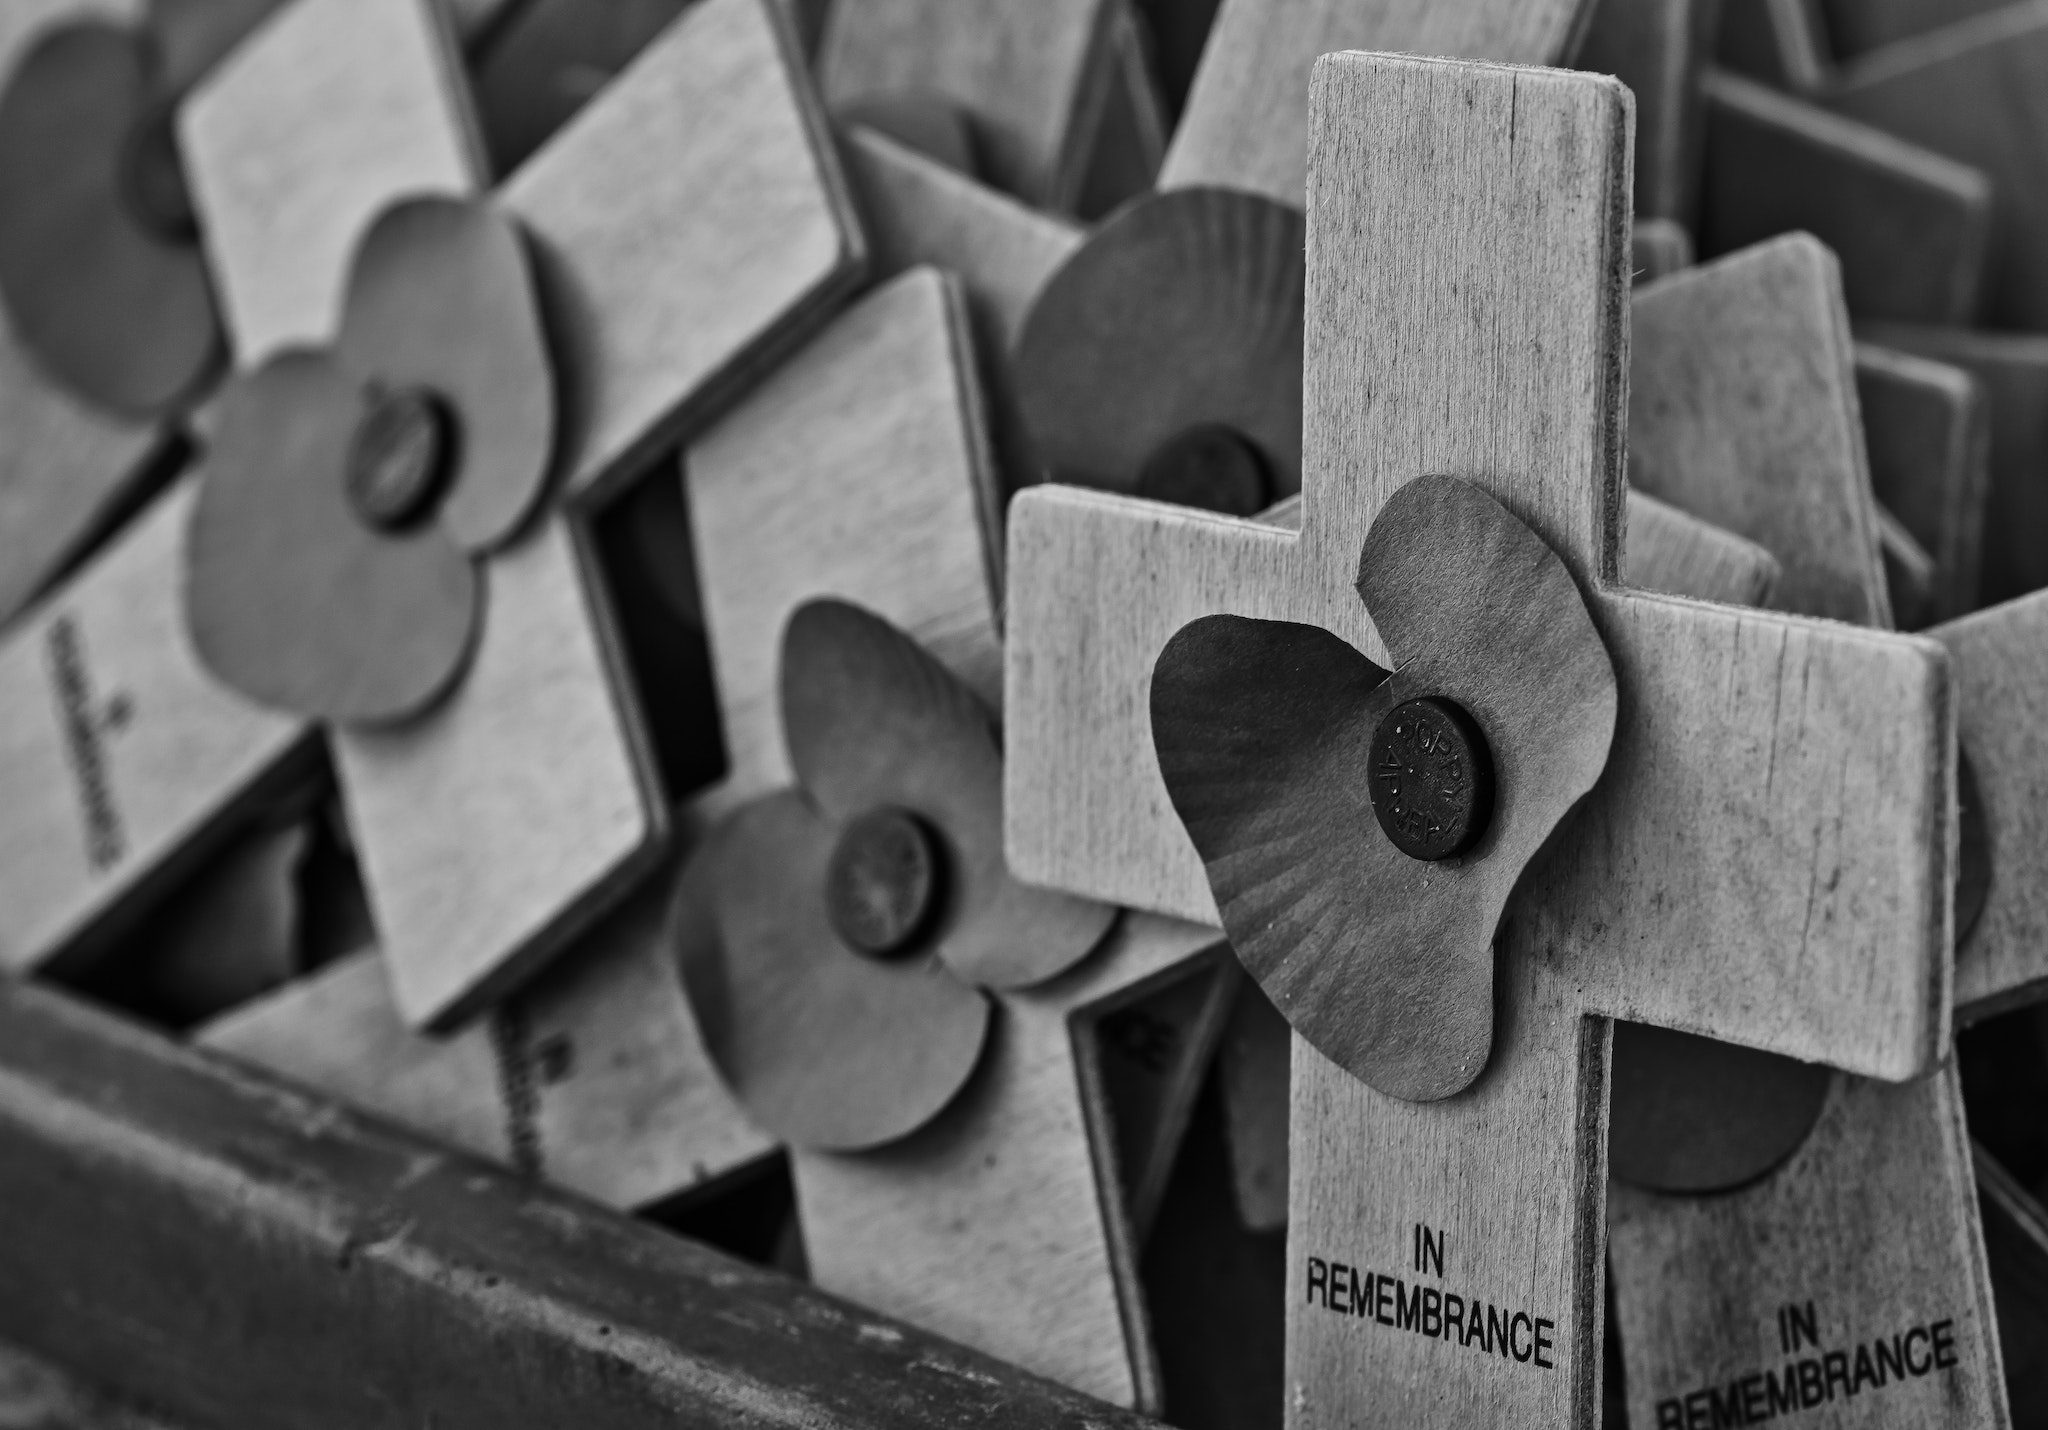 World War I class activity ideas for Remembrance Day